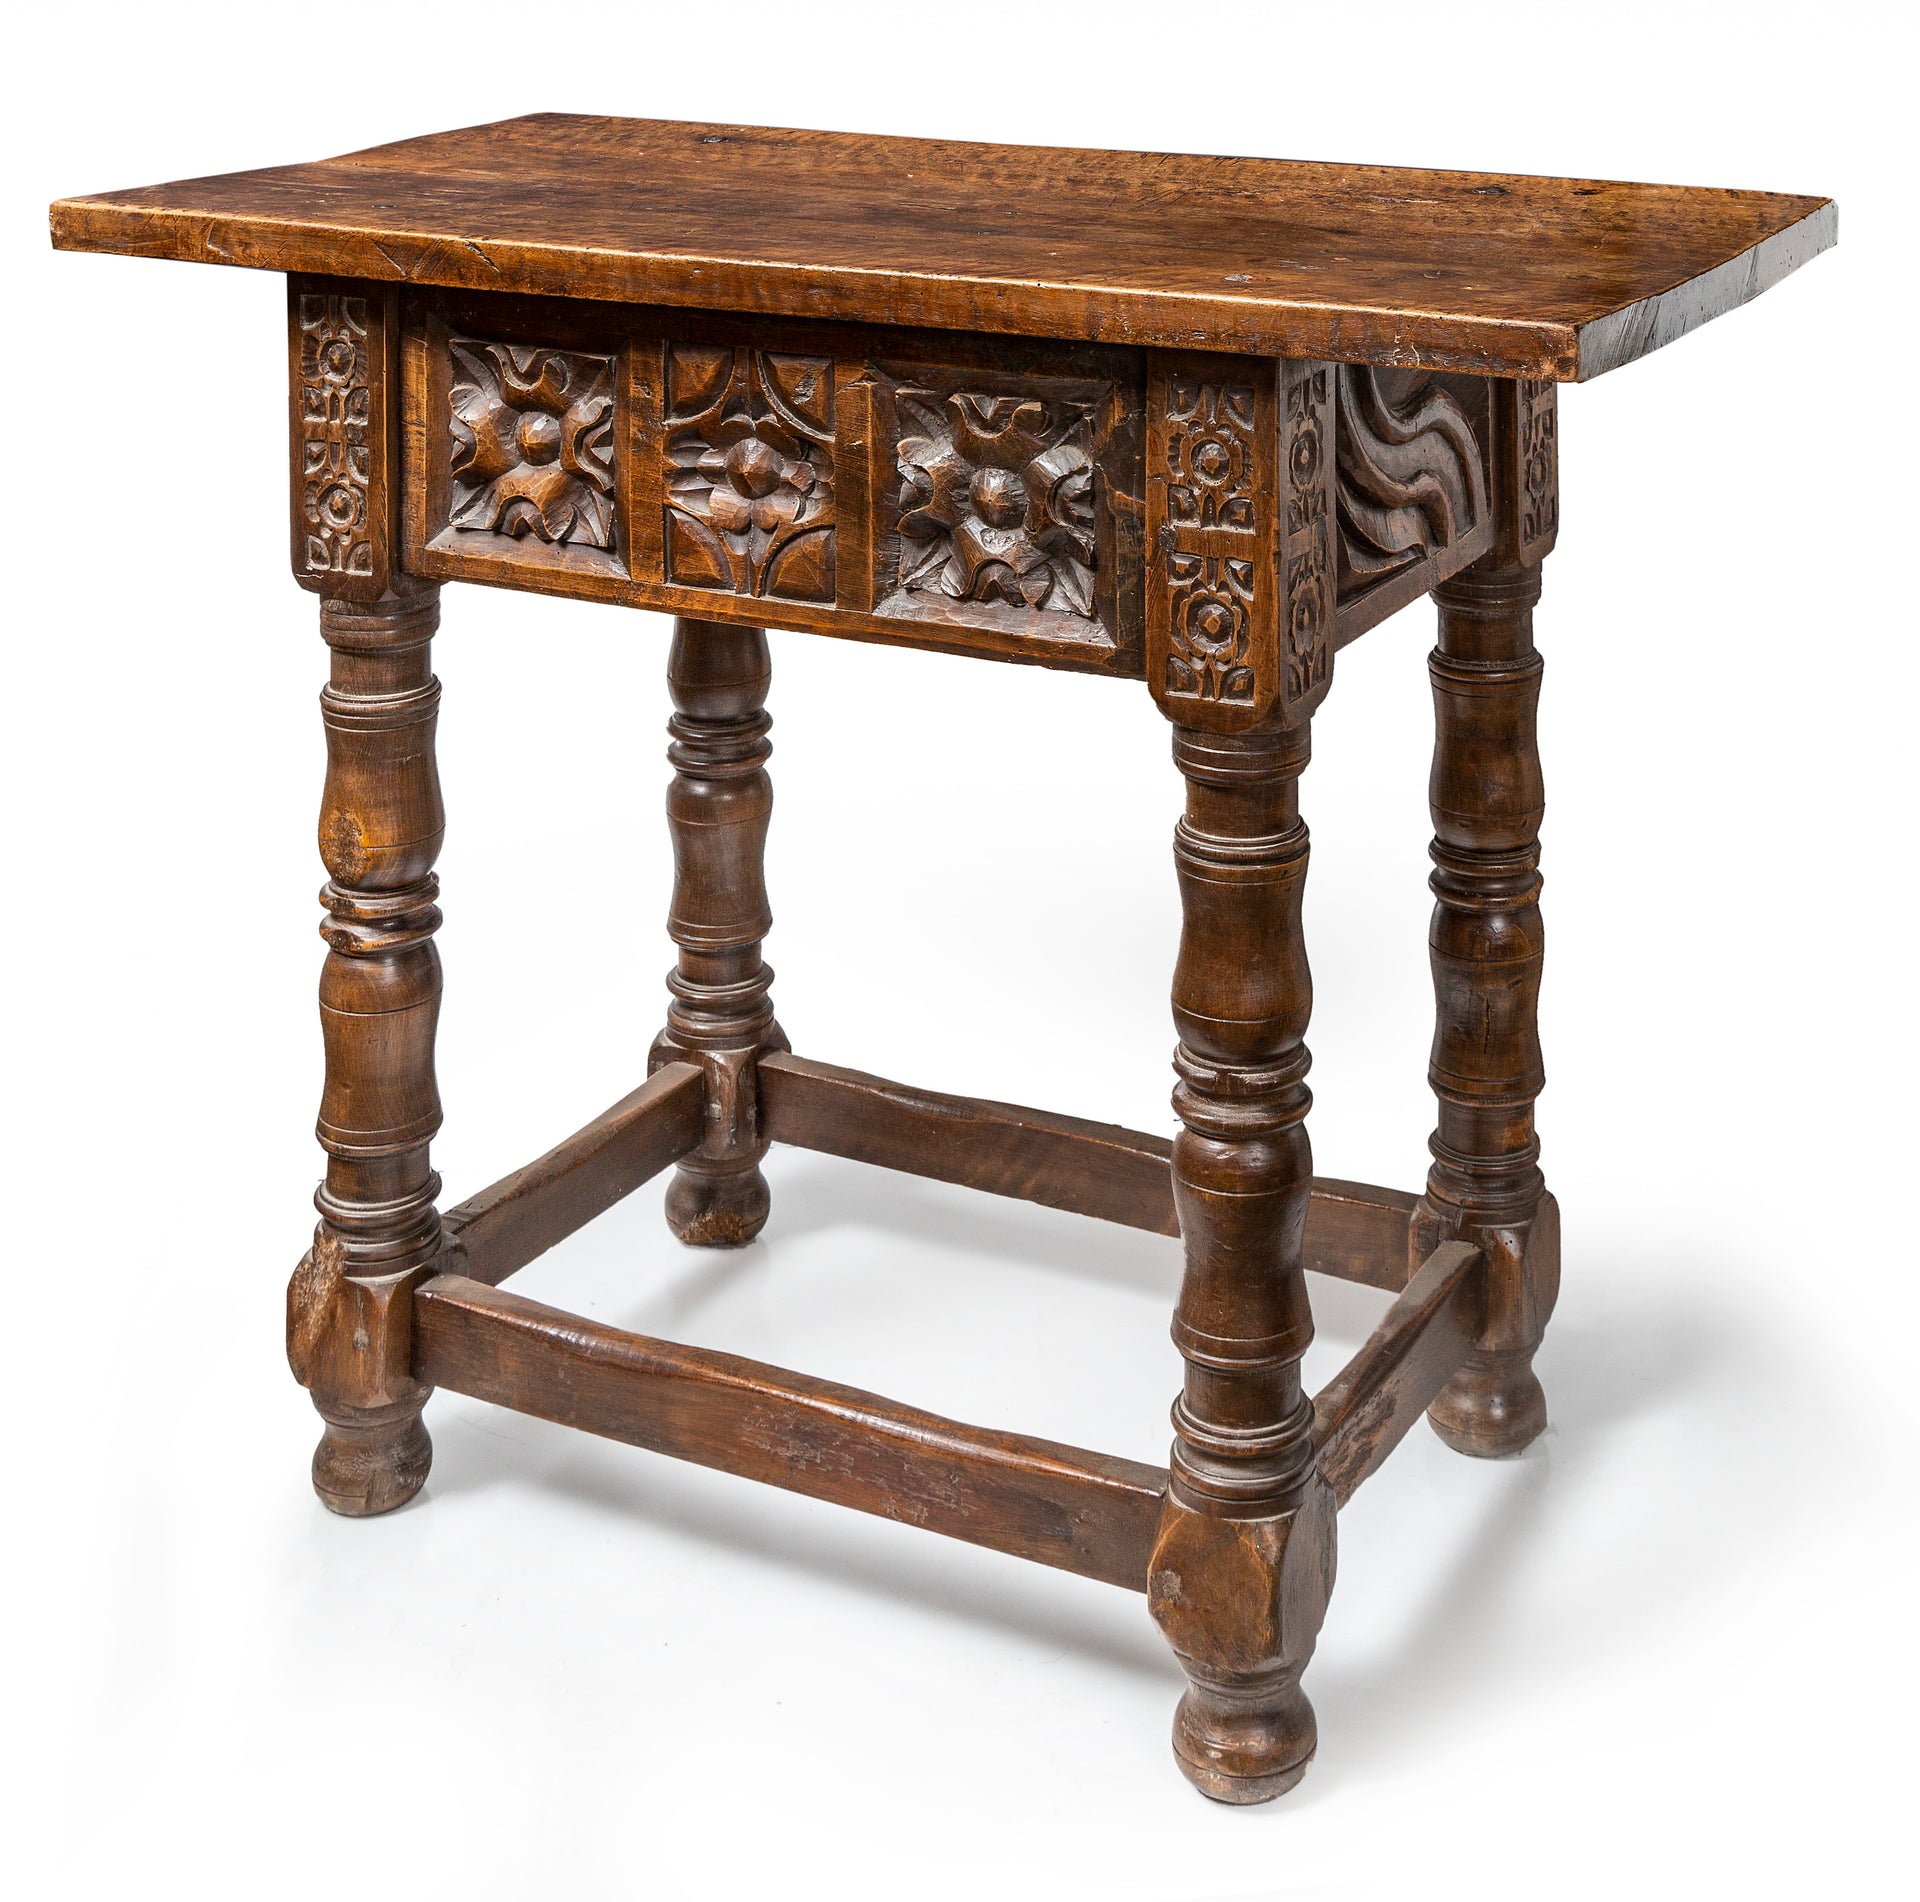 SOLD A beautifully carved walnut table, Spanish 17th Century